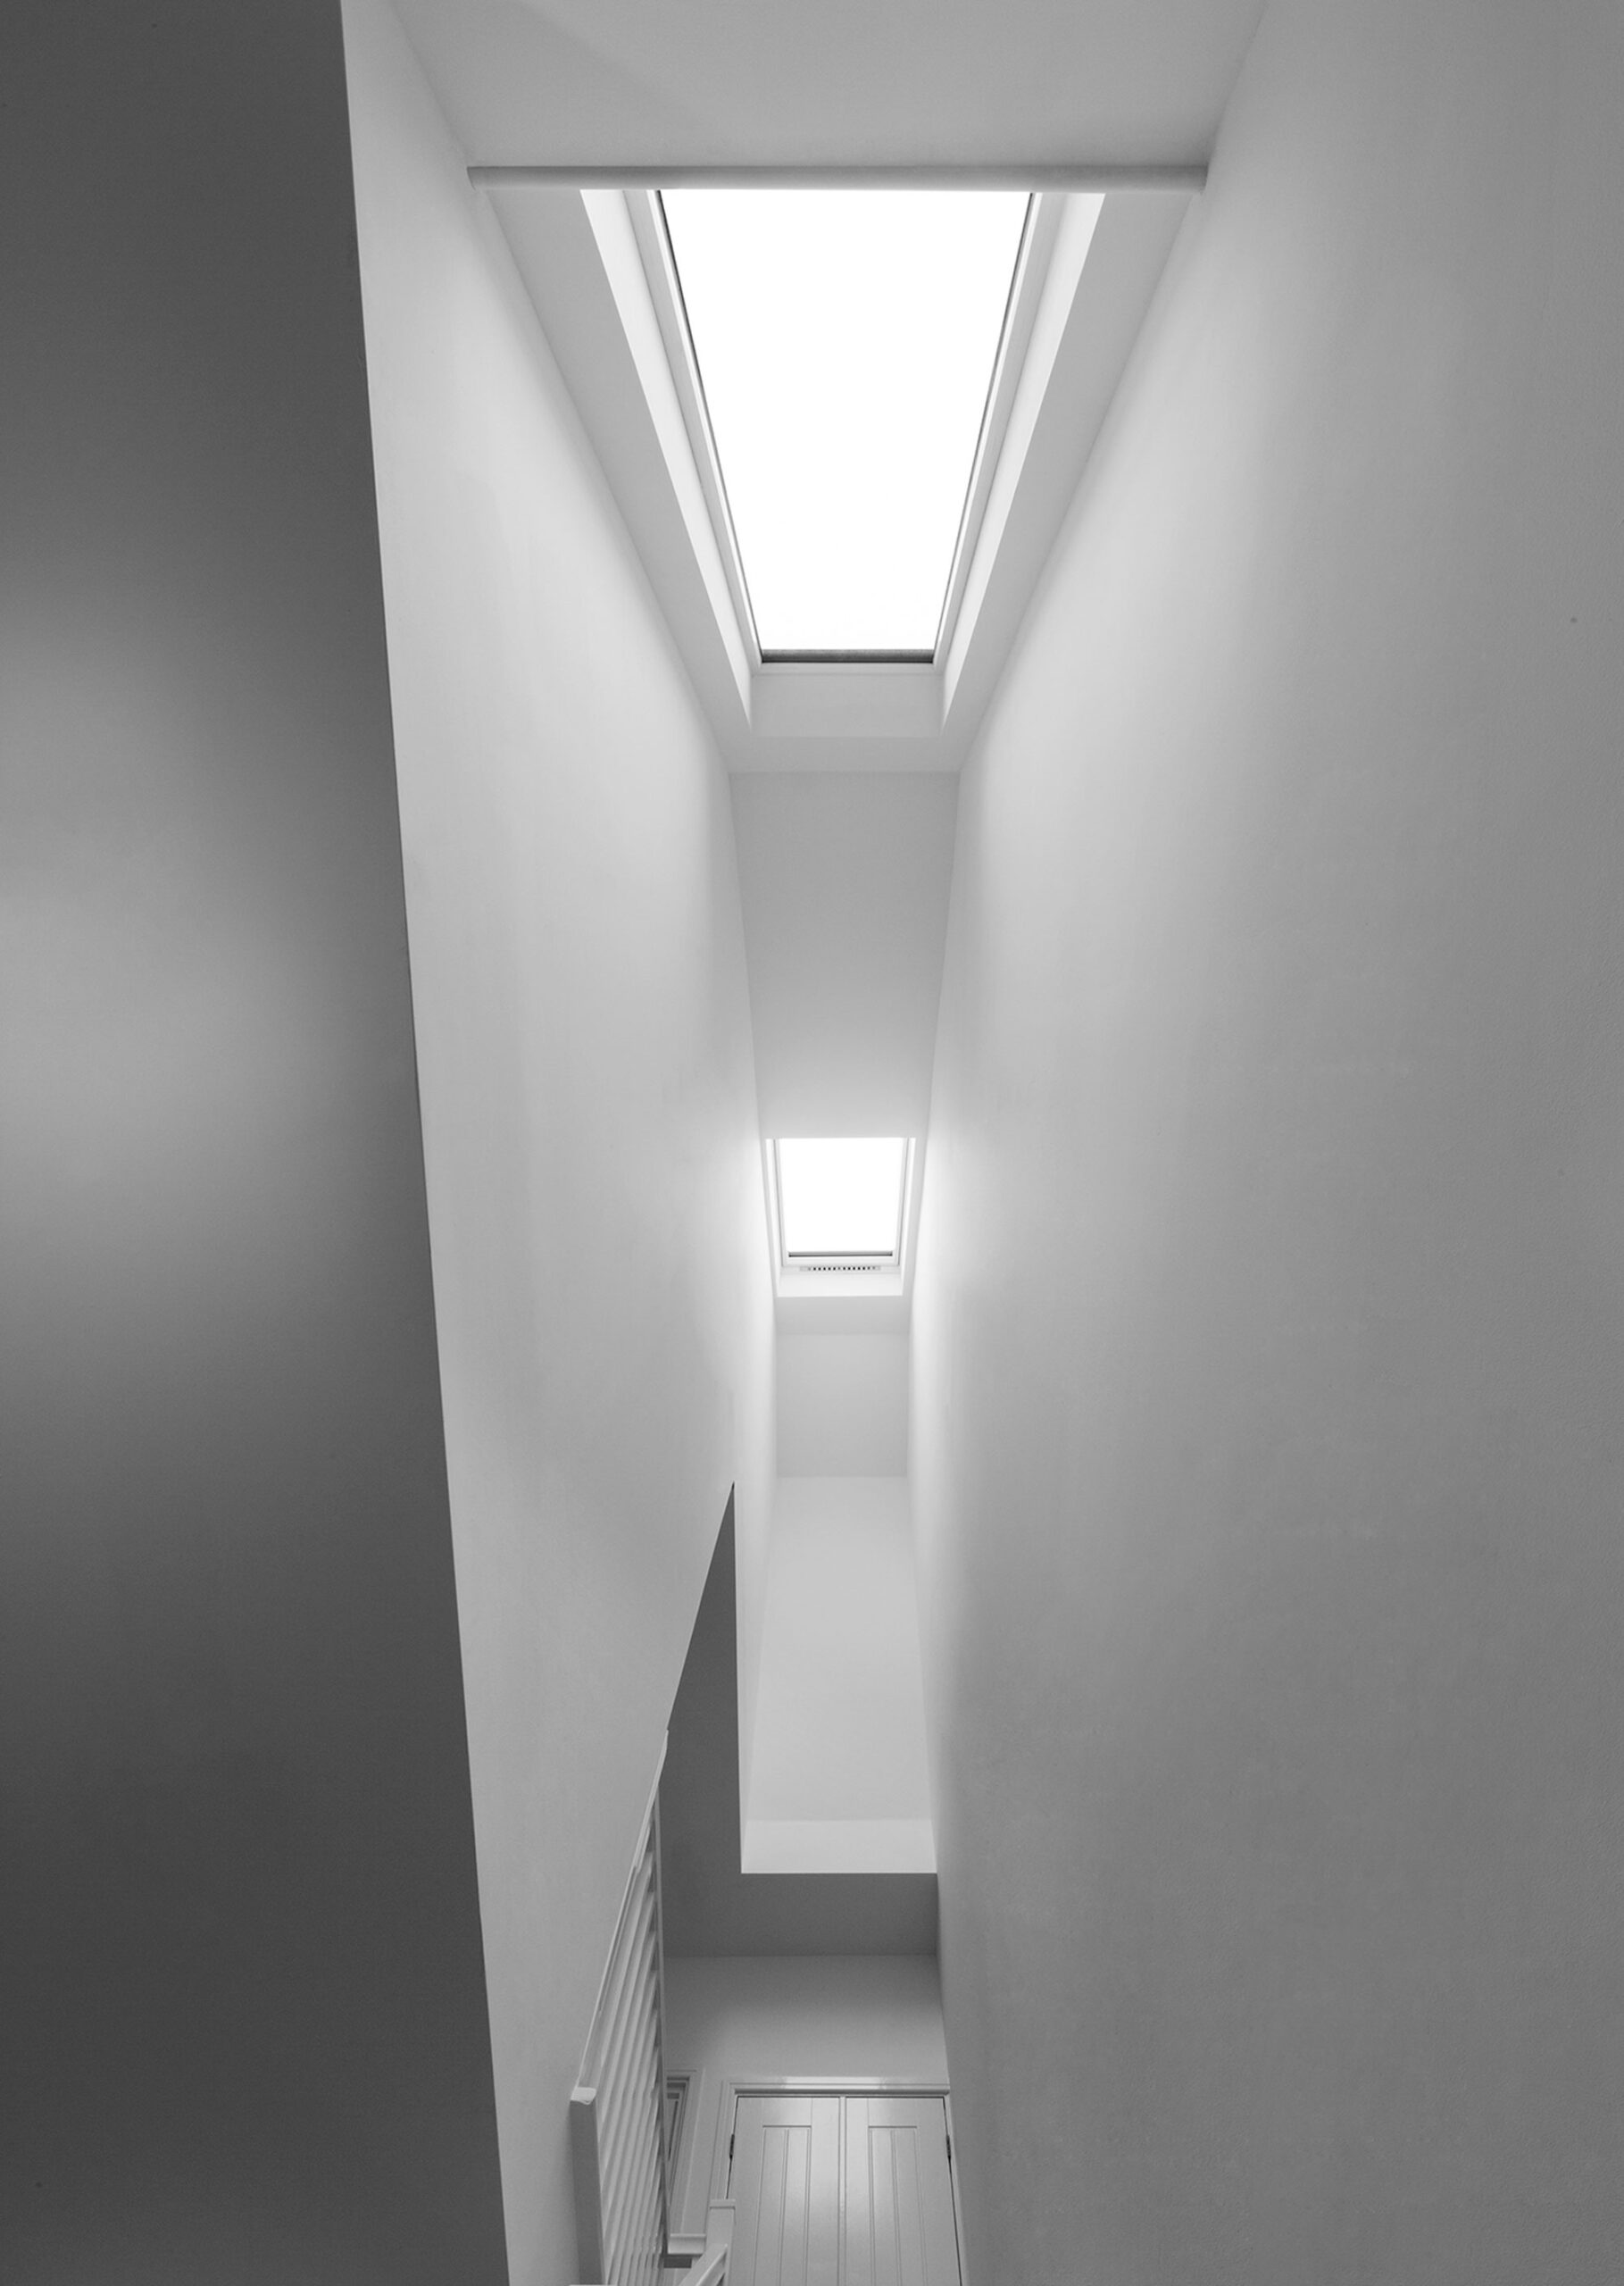 taylor-wimpey-openstudio-architects-staircase